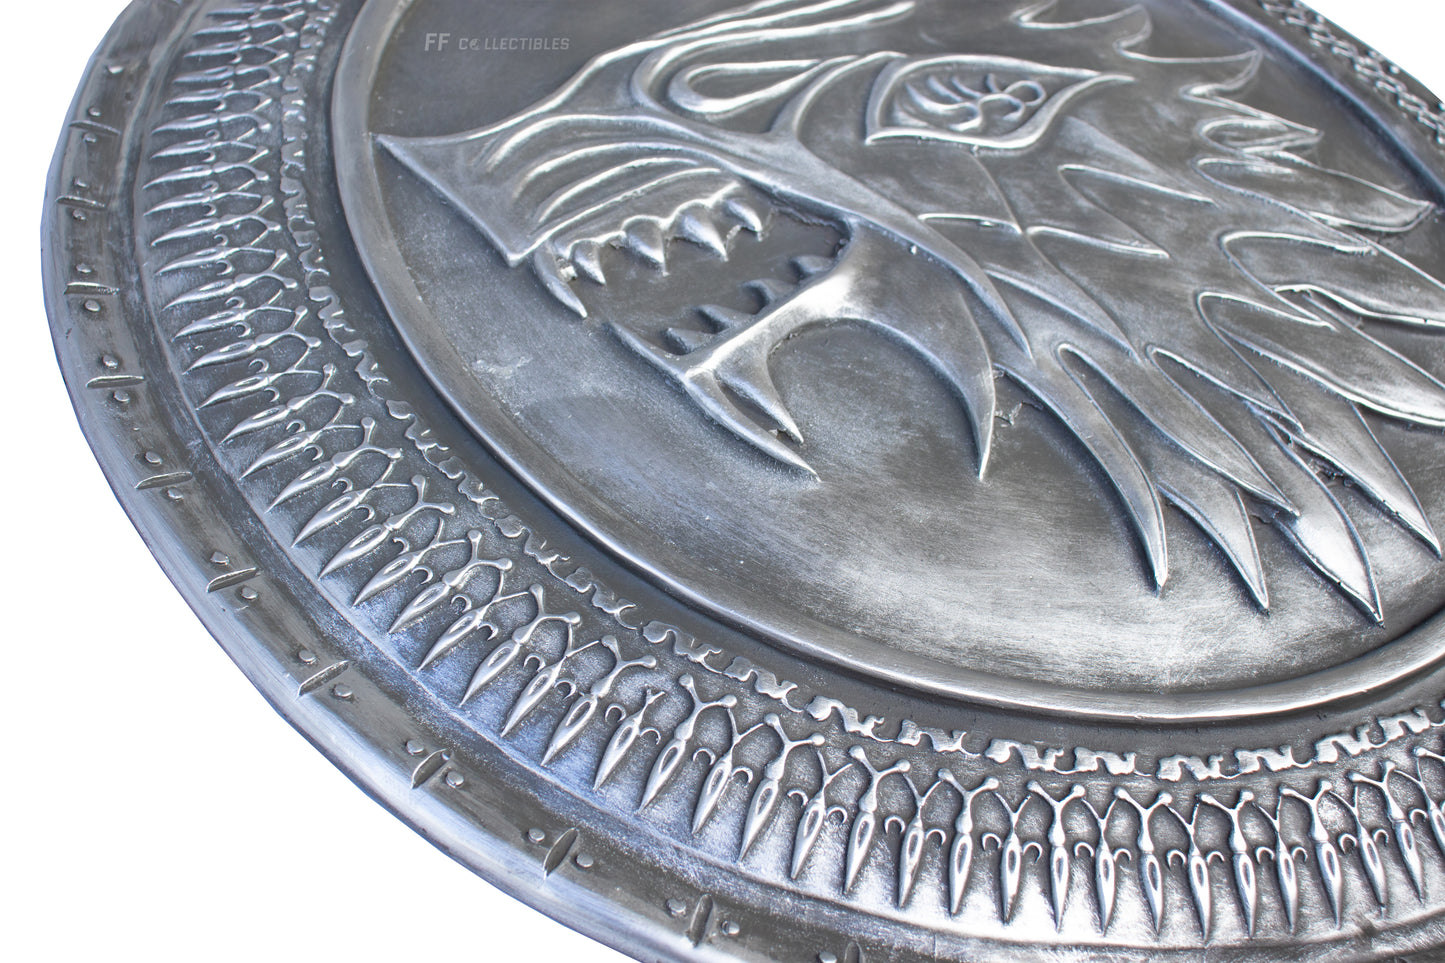 GAME OF THRONES - STARK INFANTRY SHIELD (LIFE SIZE REPLICA)